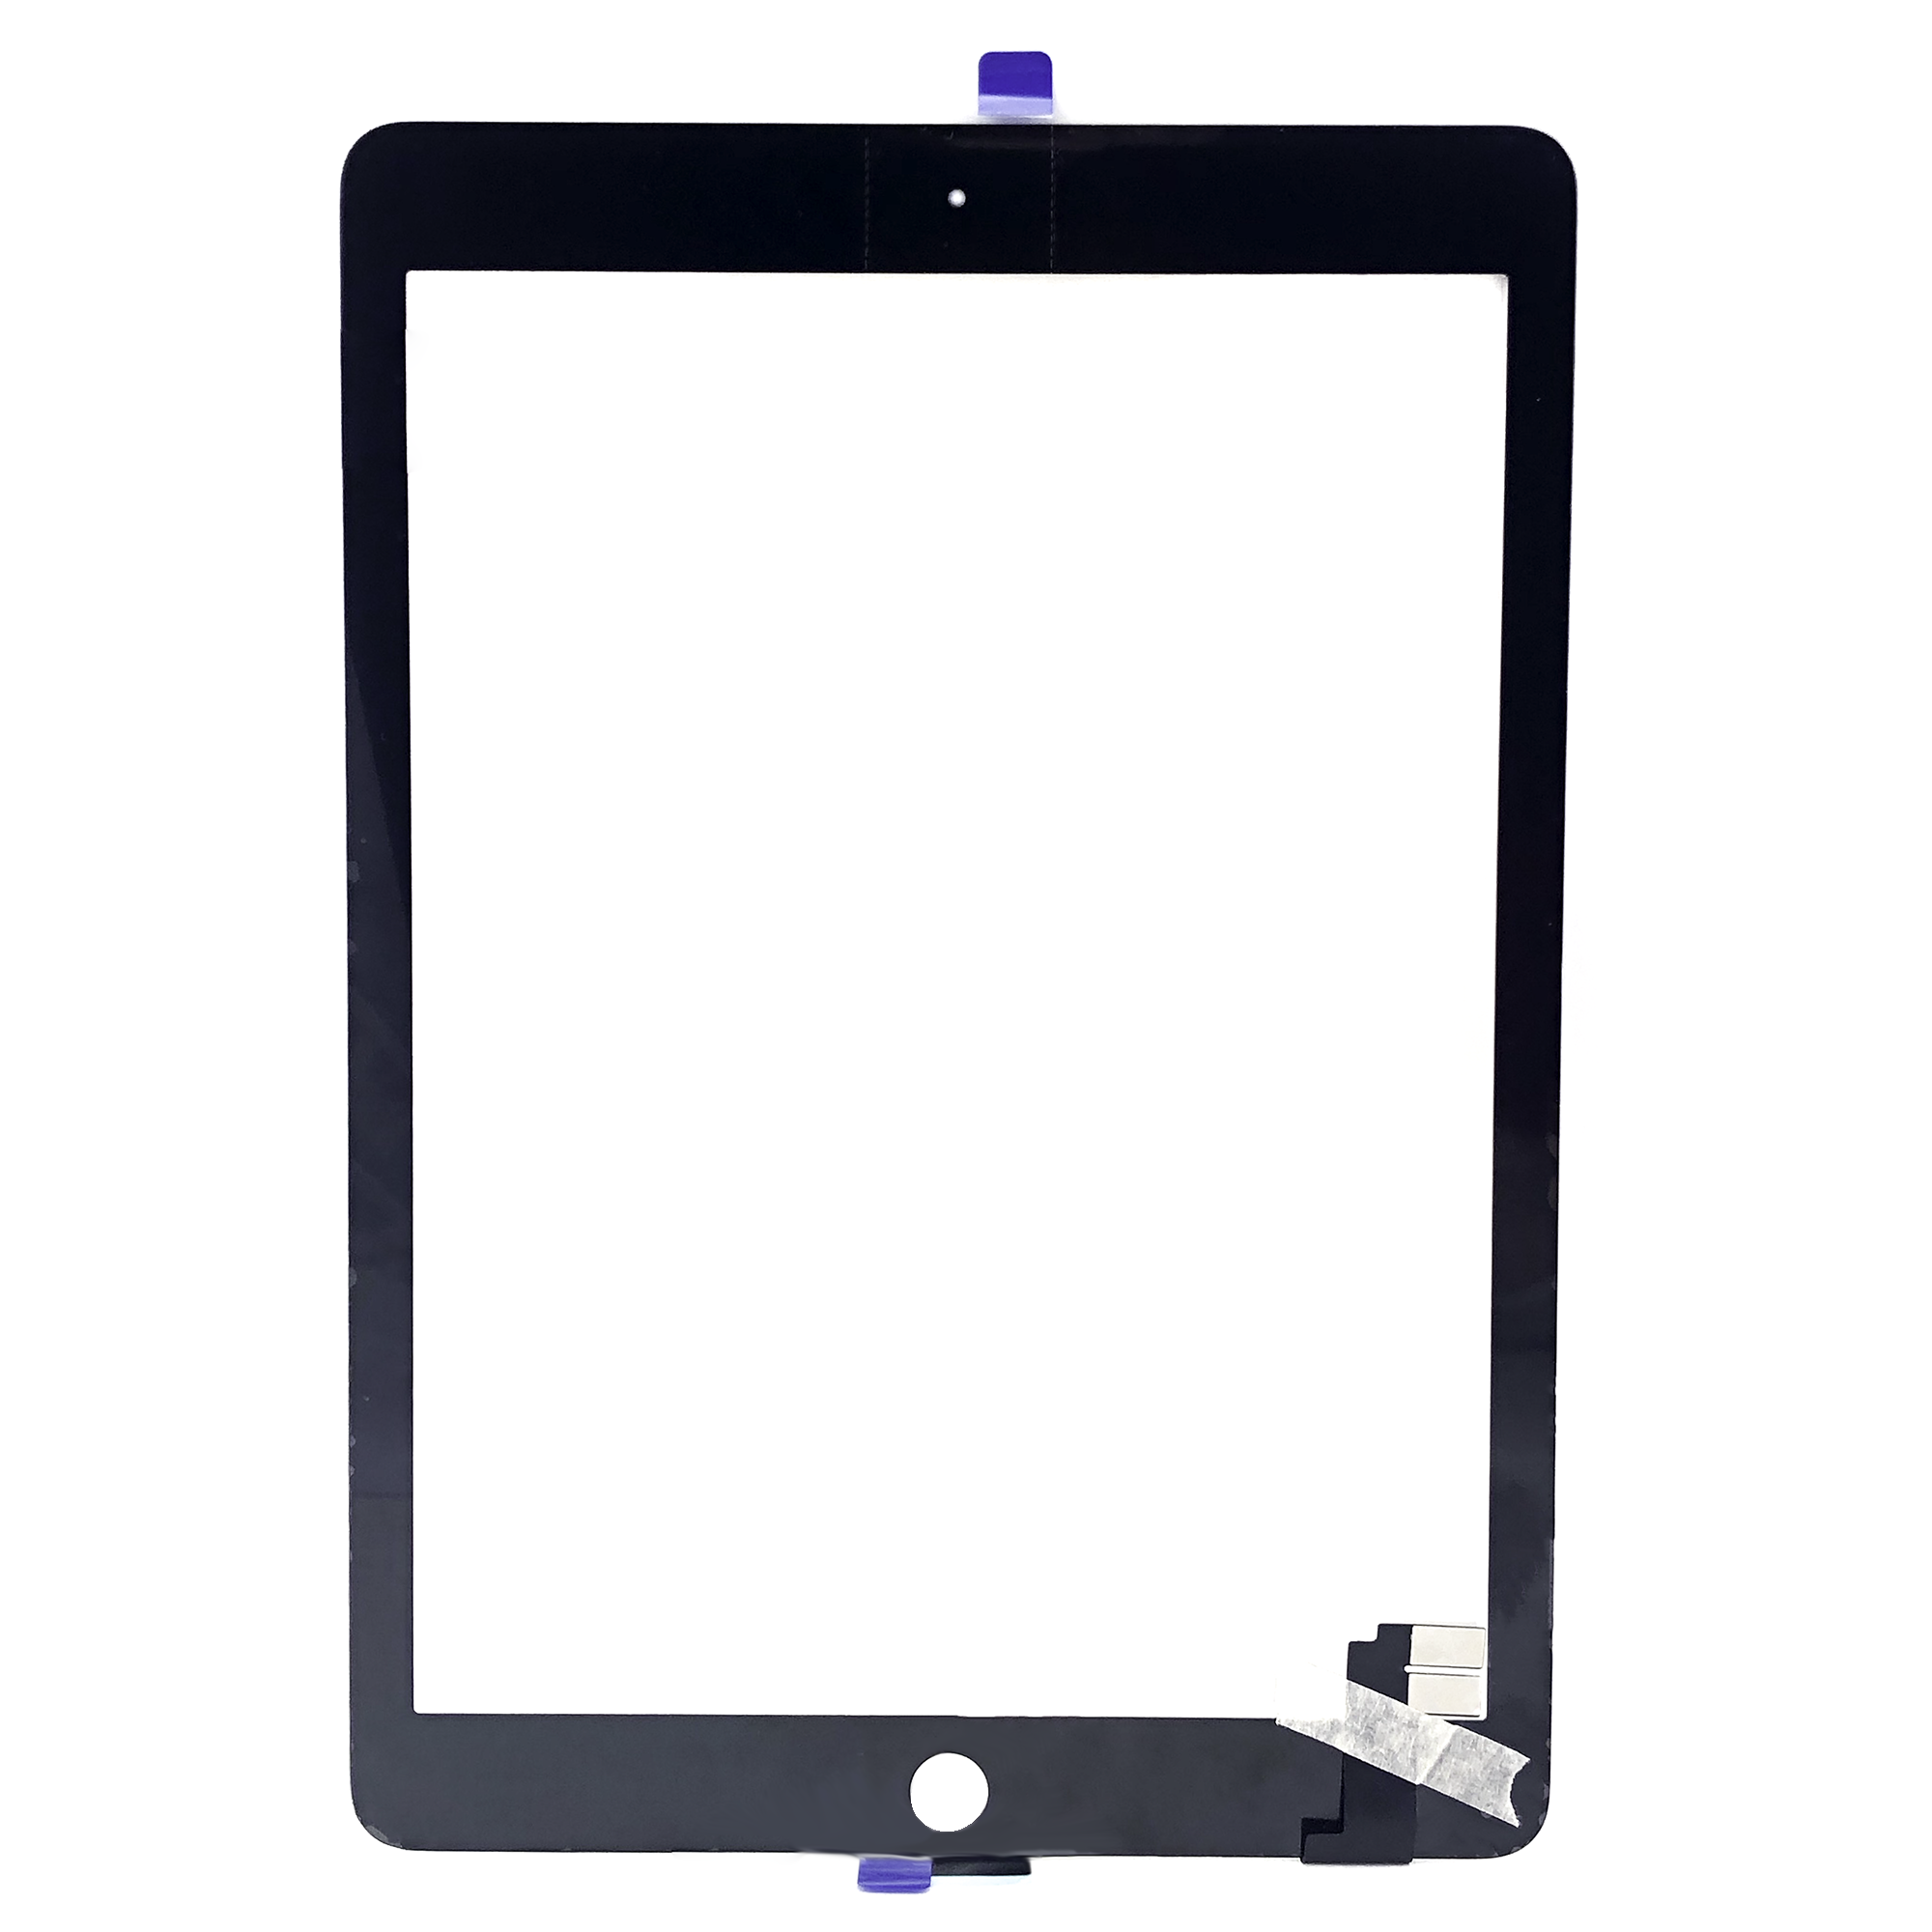 Touch Screen Digitizer For iPad 5 5th Gen 2017 9.7 (A1822 A1823